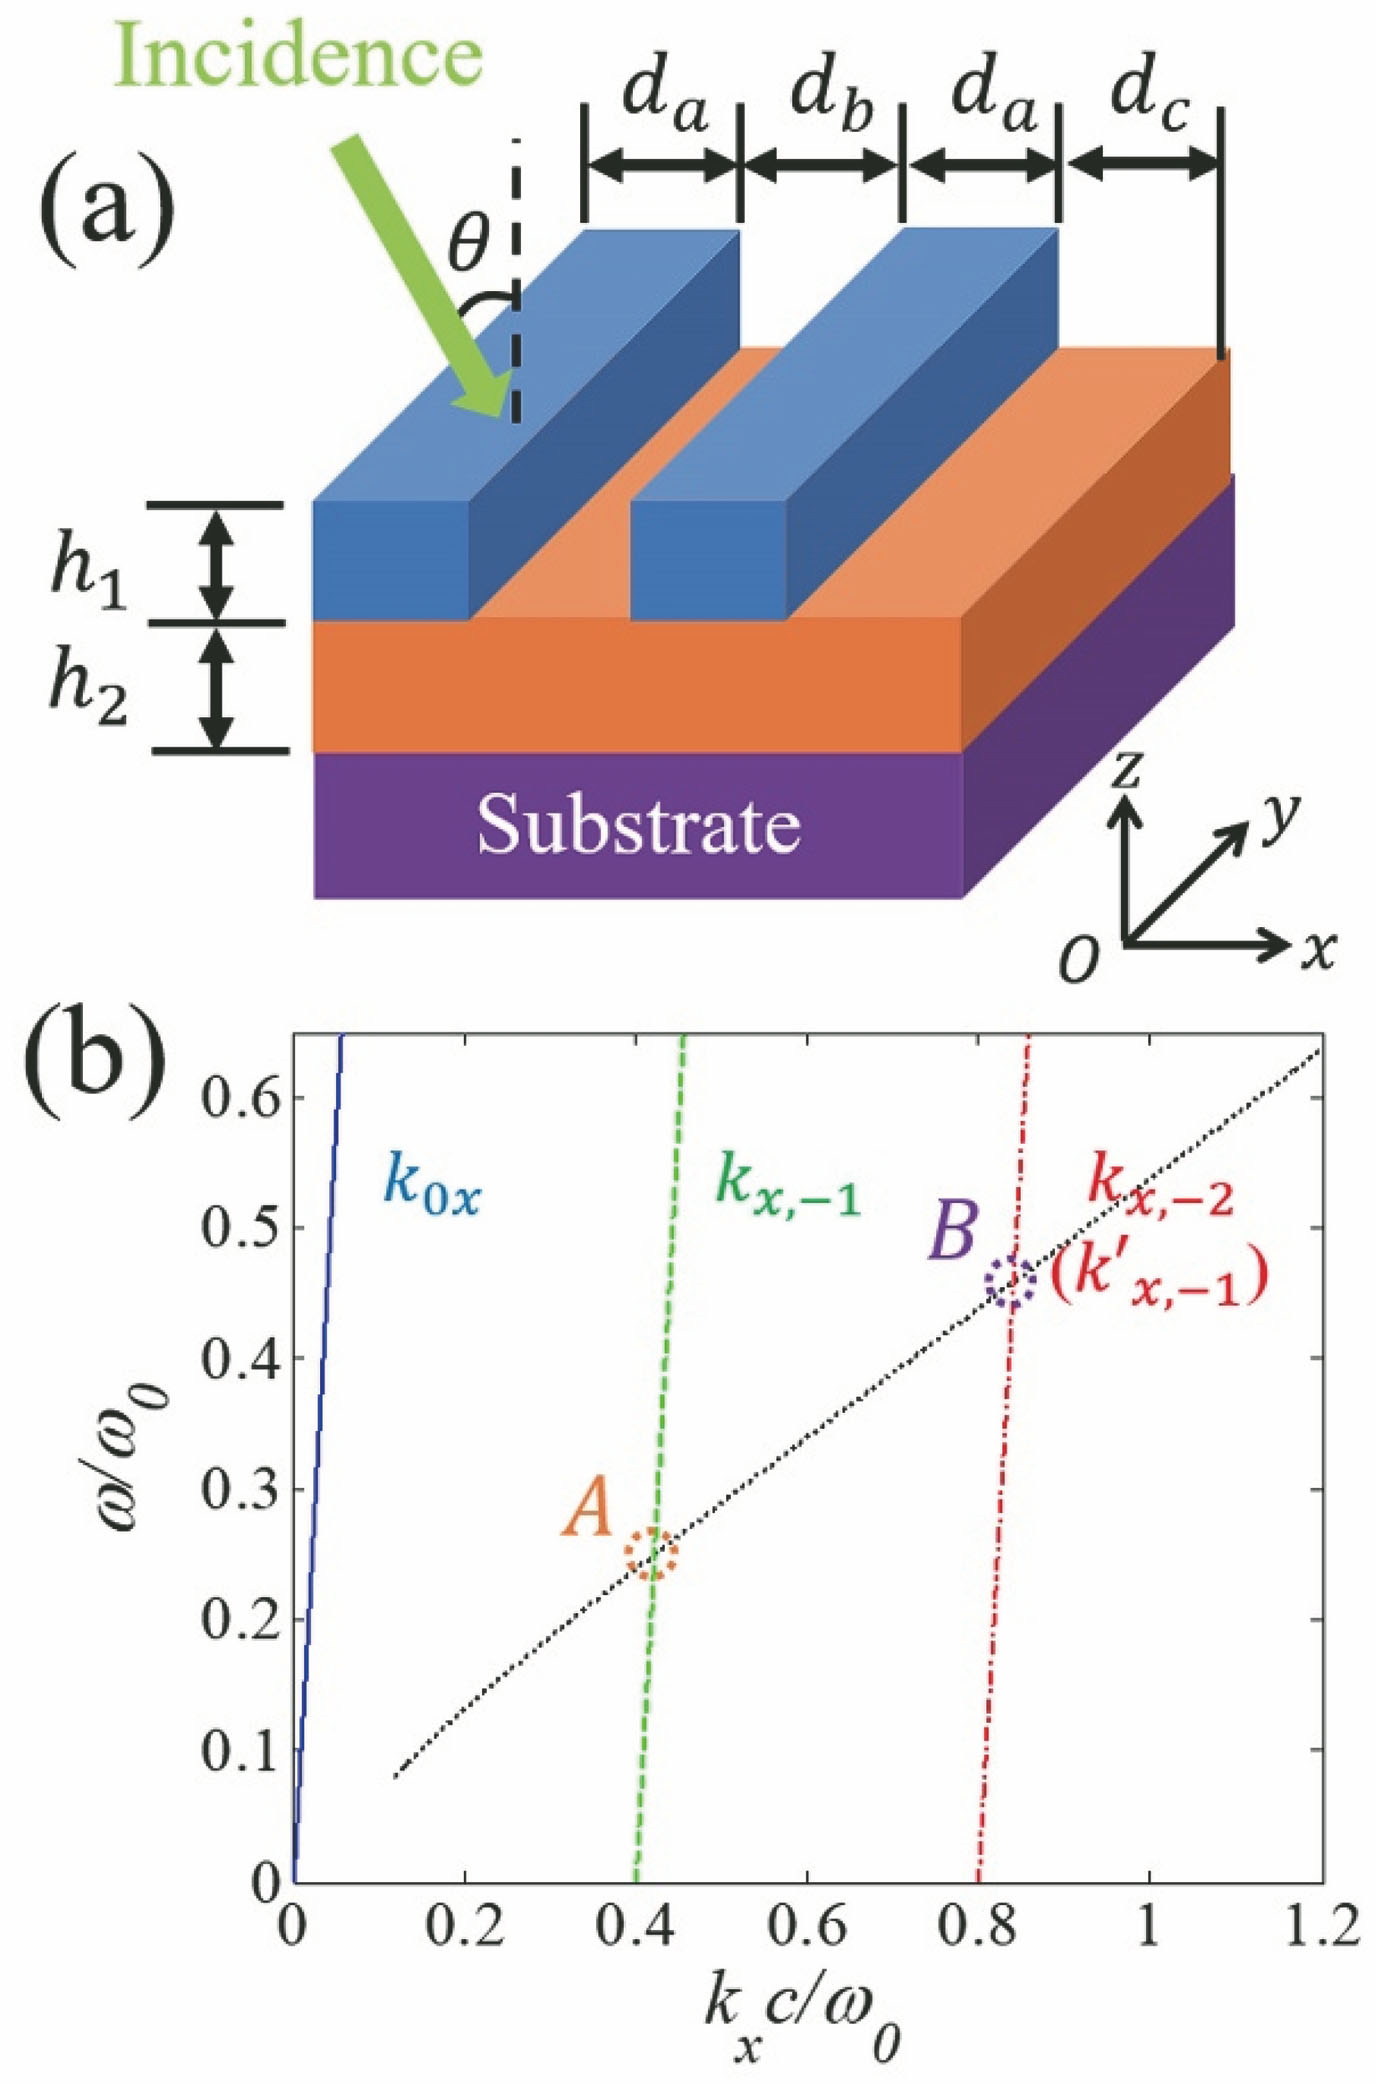 Four-part grating-waveguide composite structure and continuous spectral bound states[59]. (a) Schematic of unit cell of four-part grating-waveguide composite structure; (b) physical mechanism of formation of continuous spectral bound states